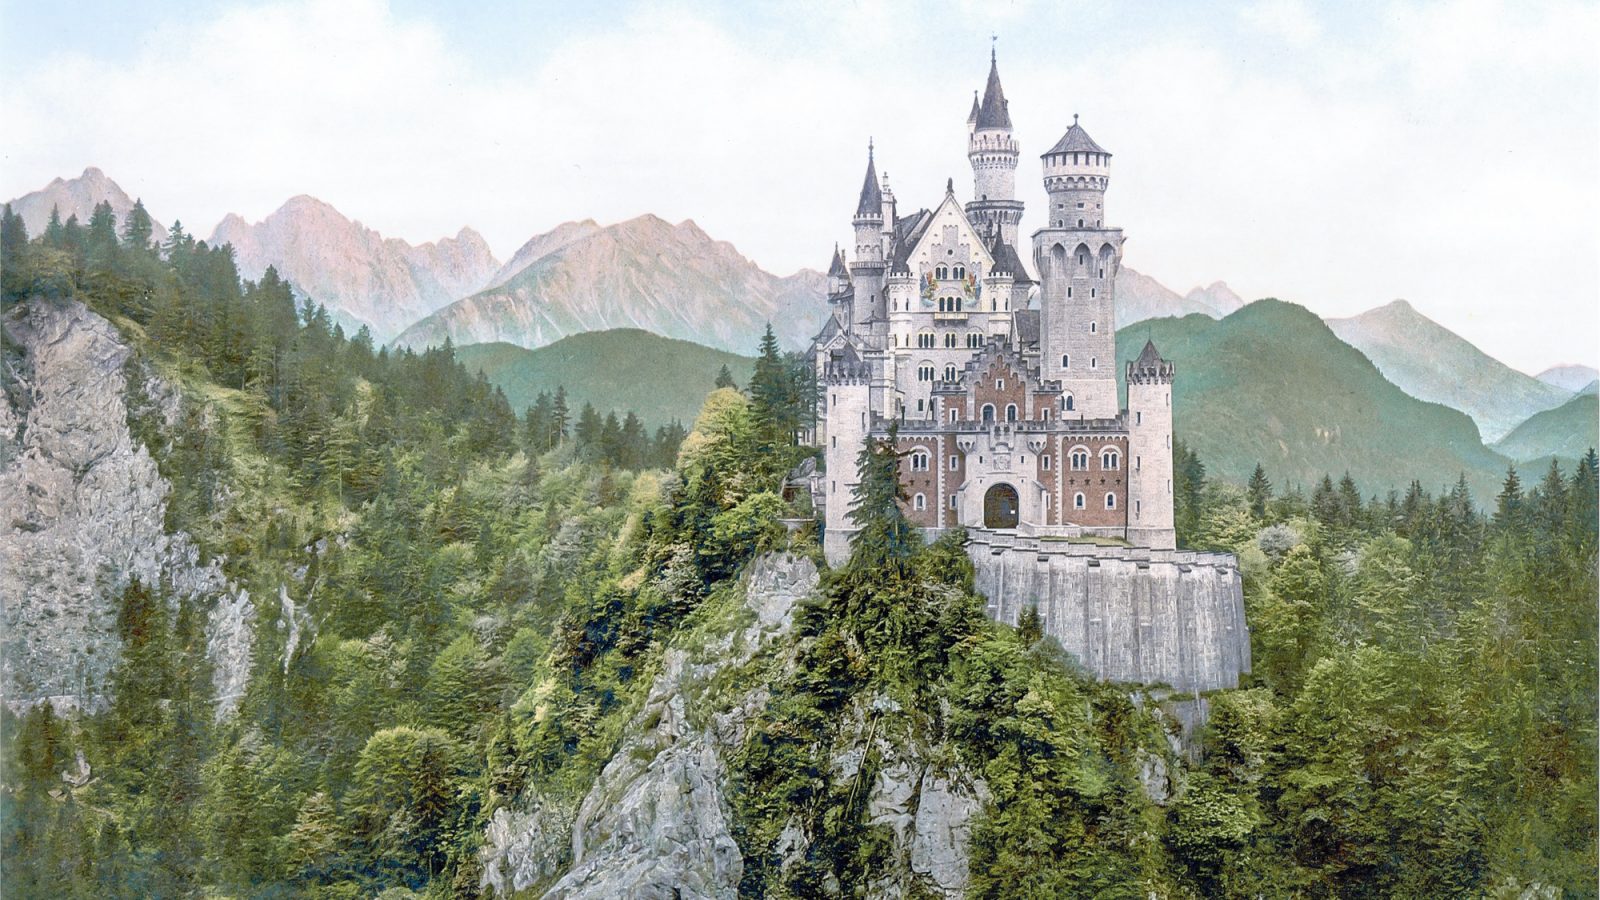 Traveling to Germany? Read these book | Books to read before traveling to Germany | WWII, Mad King Ludwig and Neuschwanstein Castle, Swan King, history